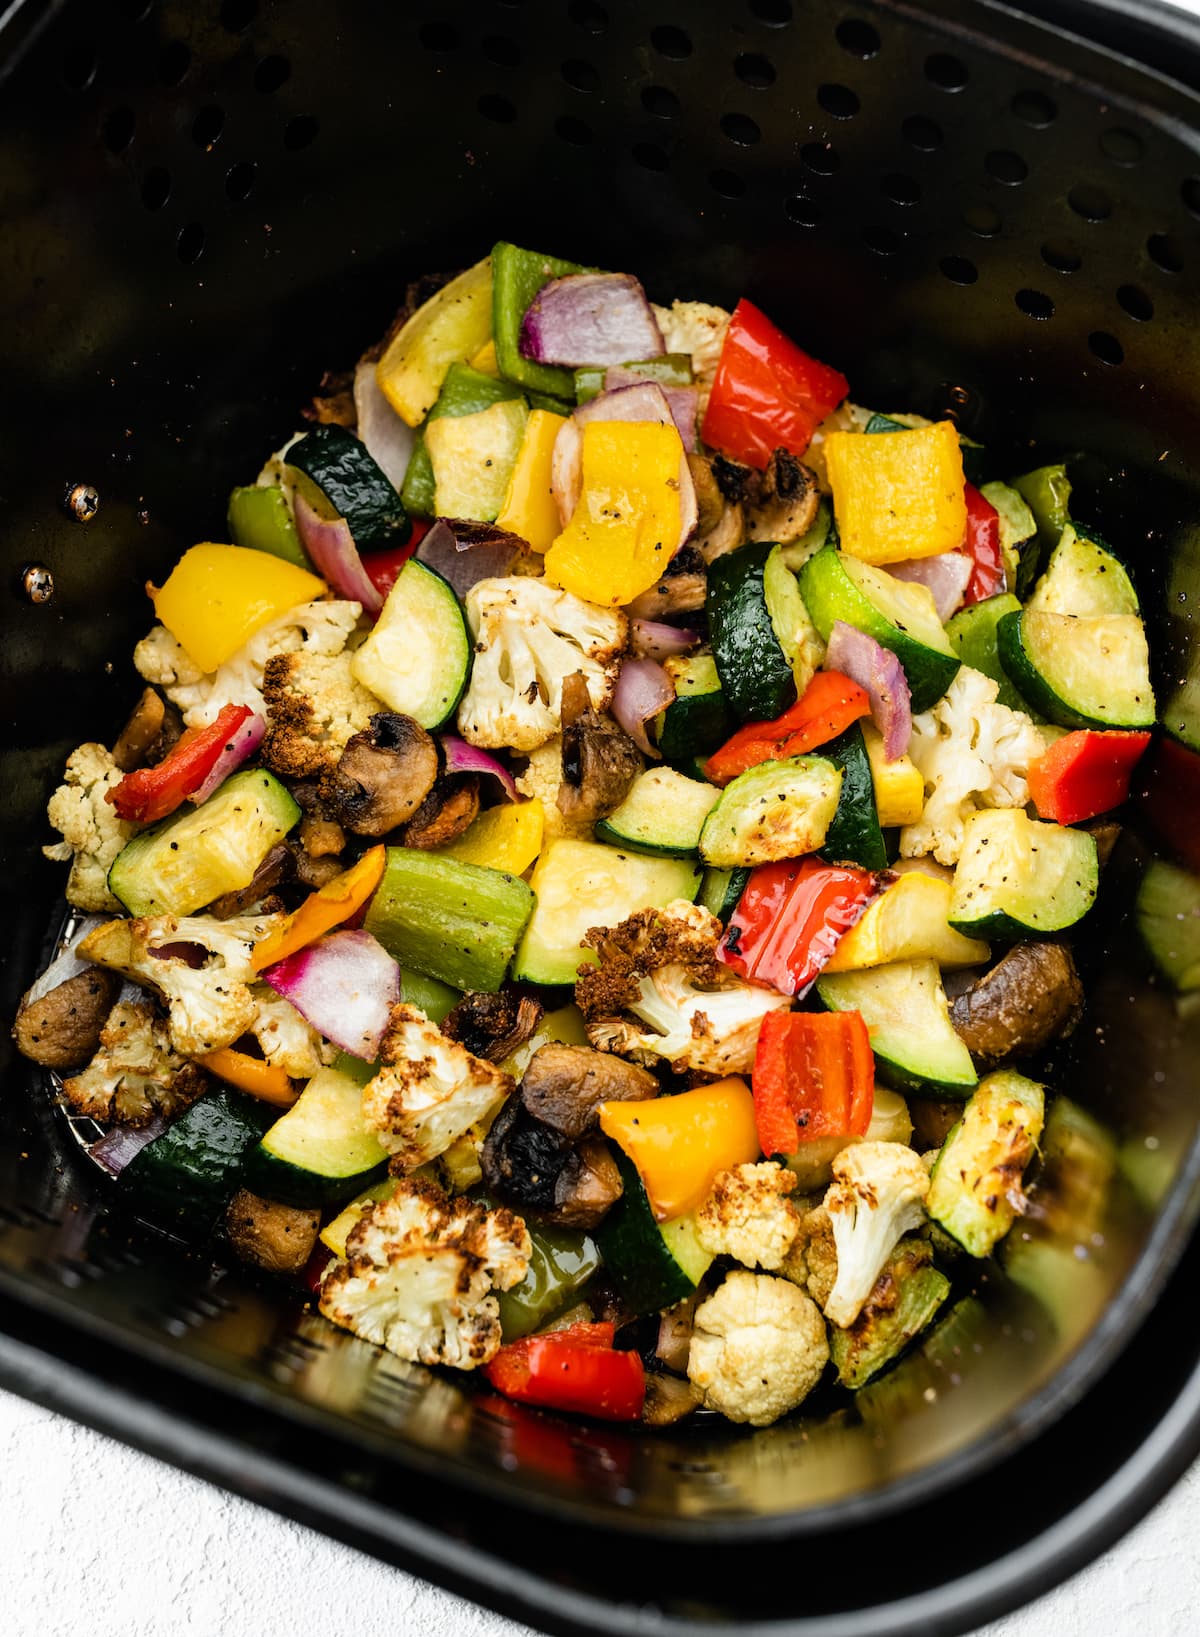 Air-fried vegetables in an air fryer. Vegetables include cauliflower, mushroom, onion, zucchini, and bell peppers.